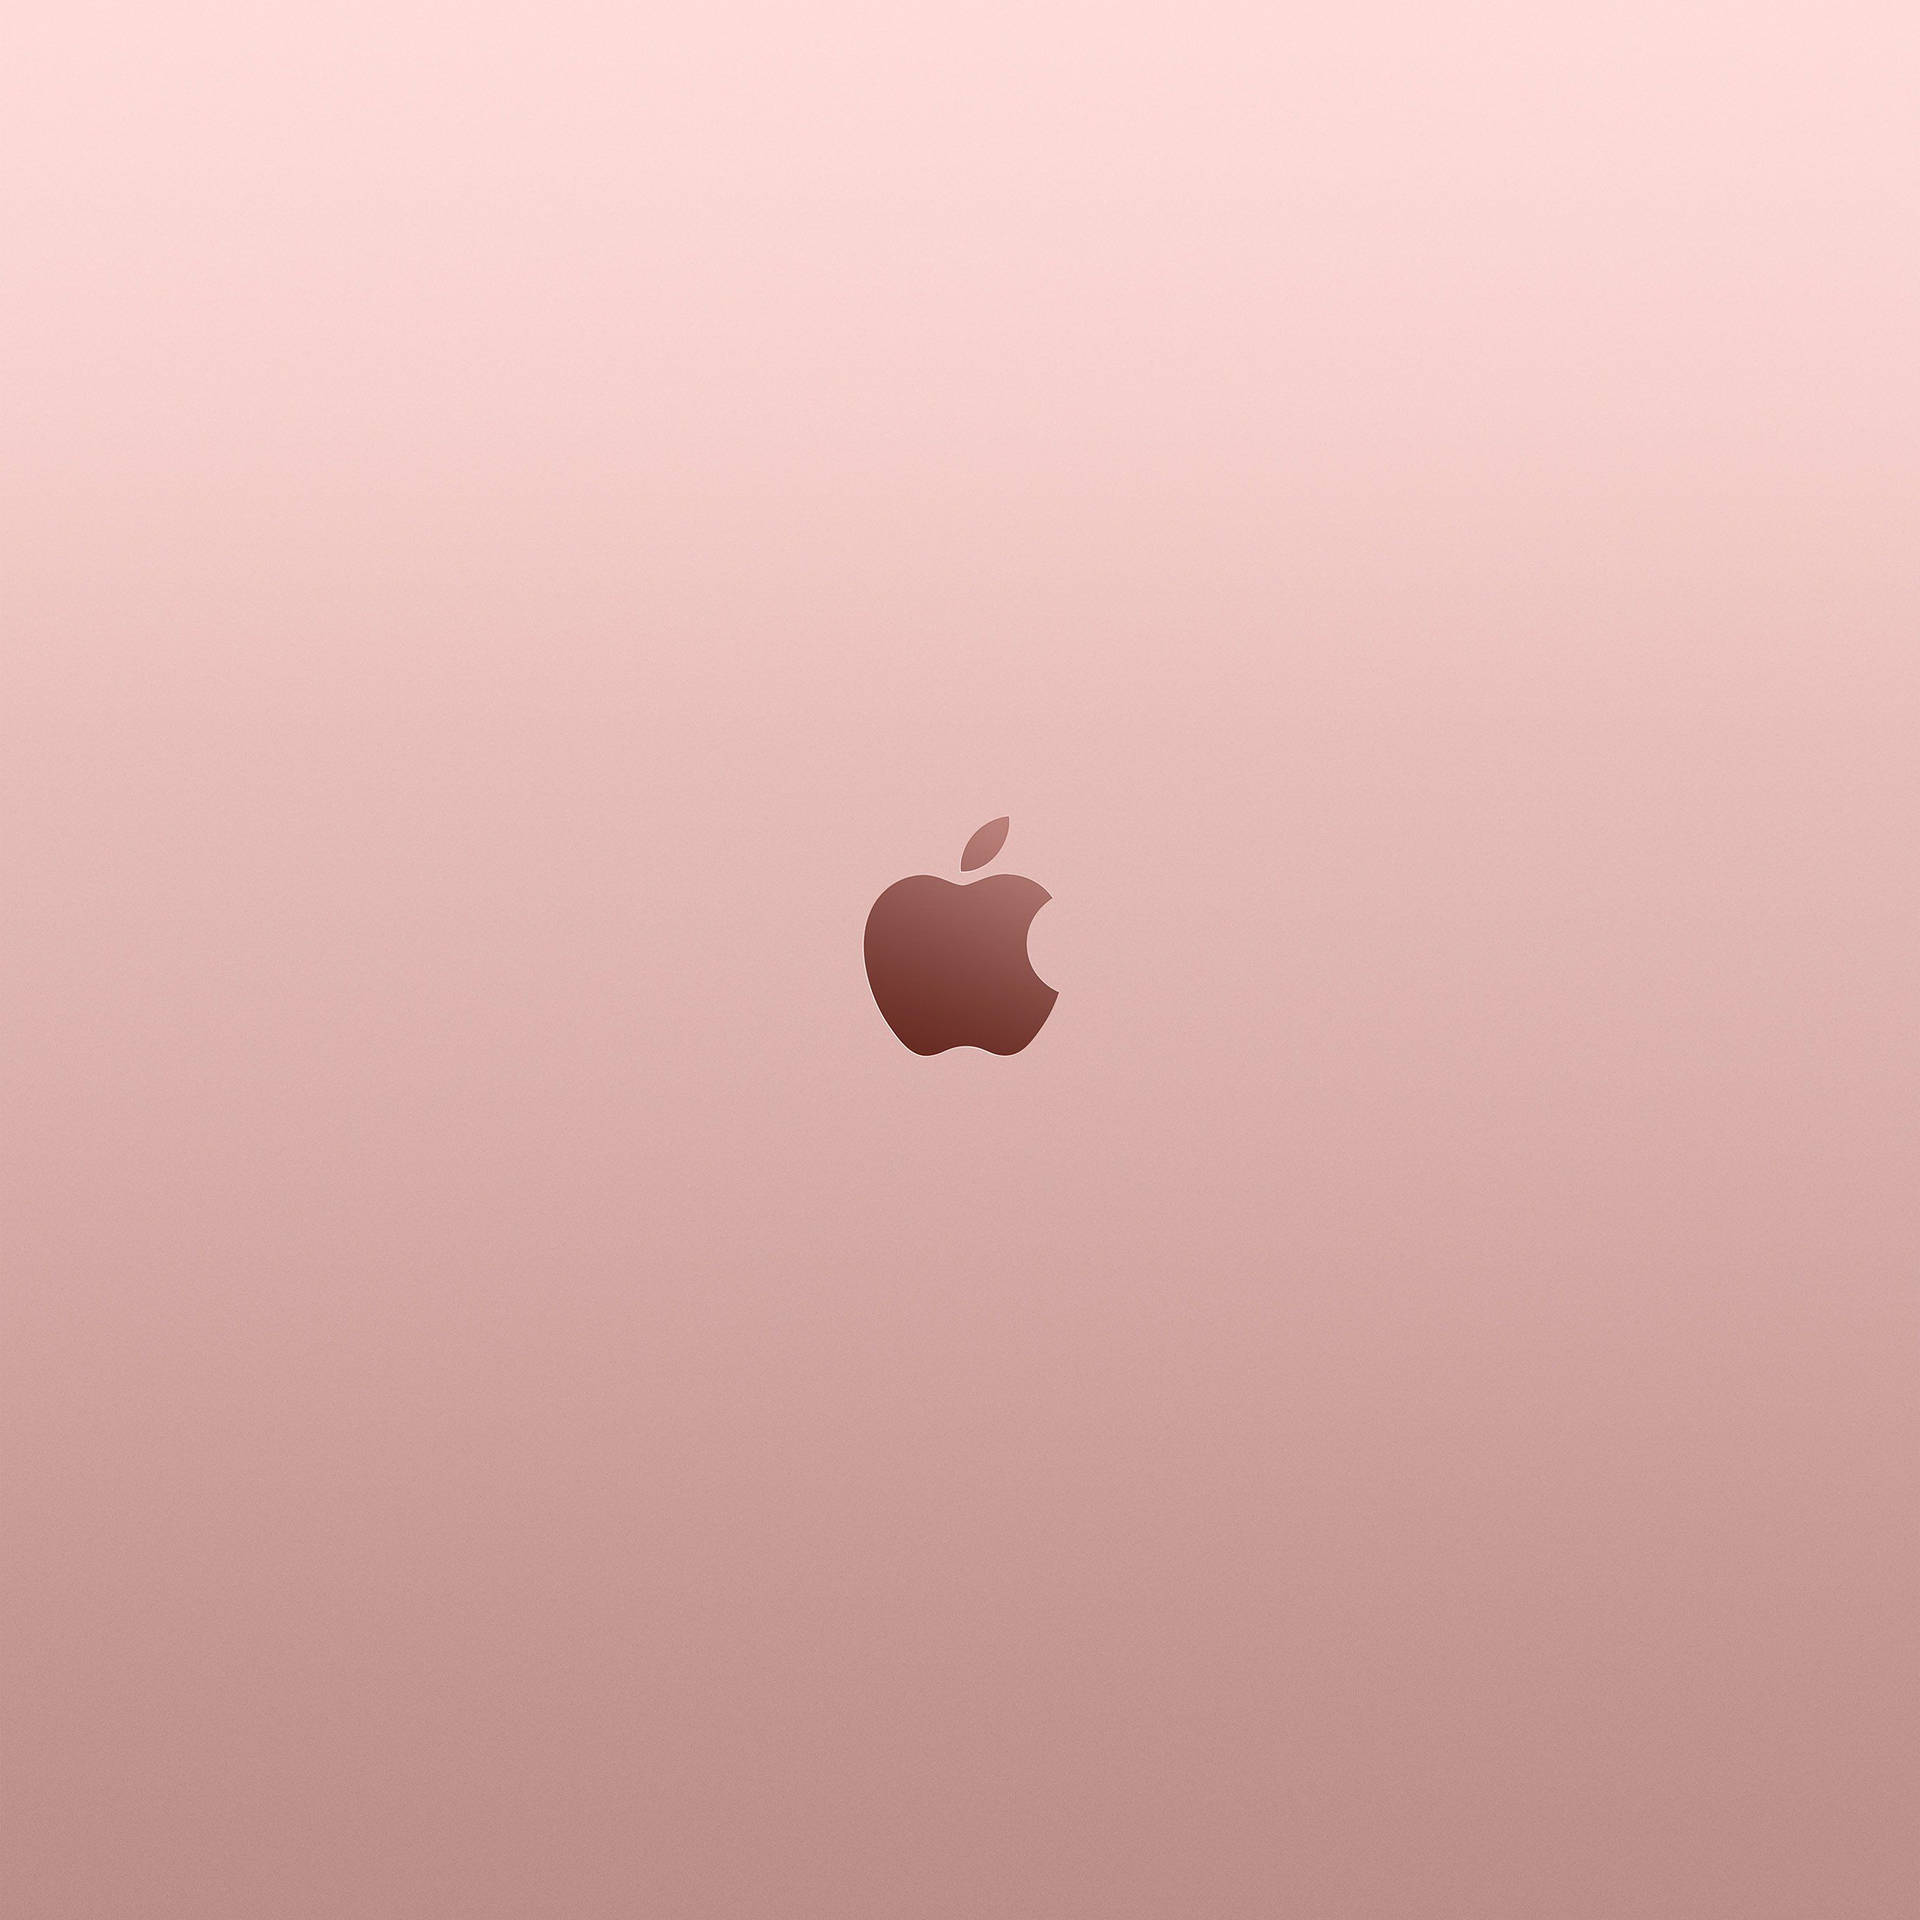 Rose Gold 2732X2732 Wallpaper and Background Image